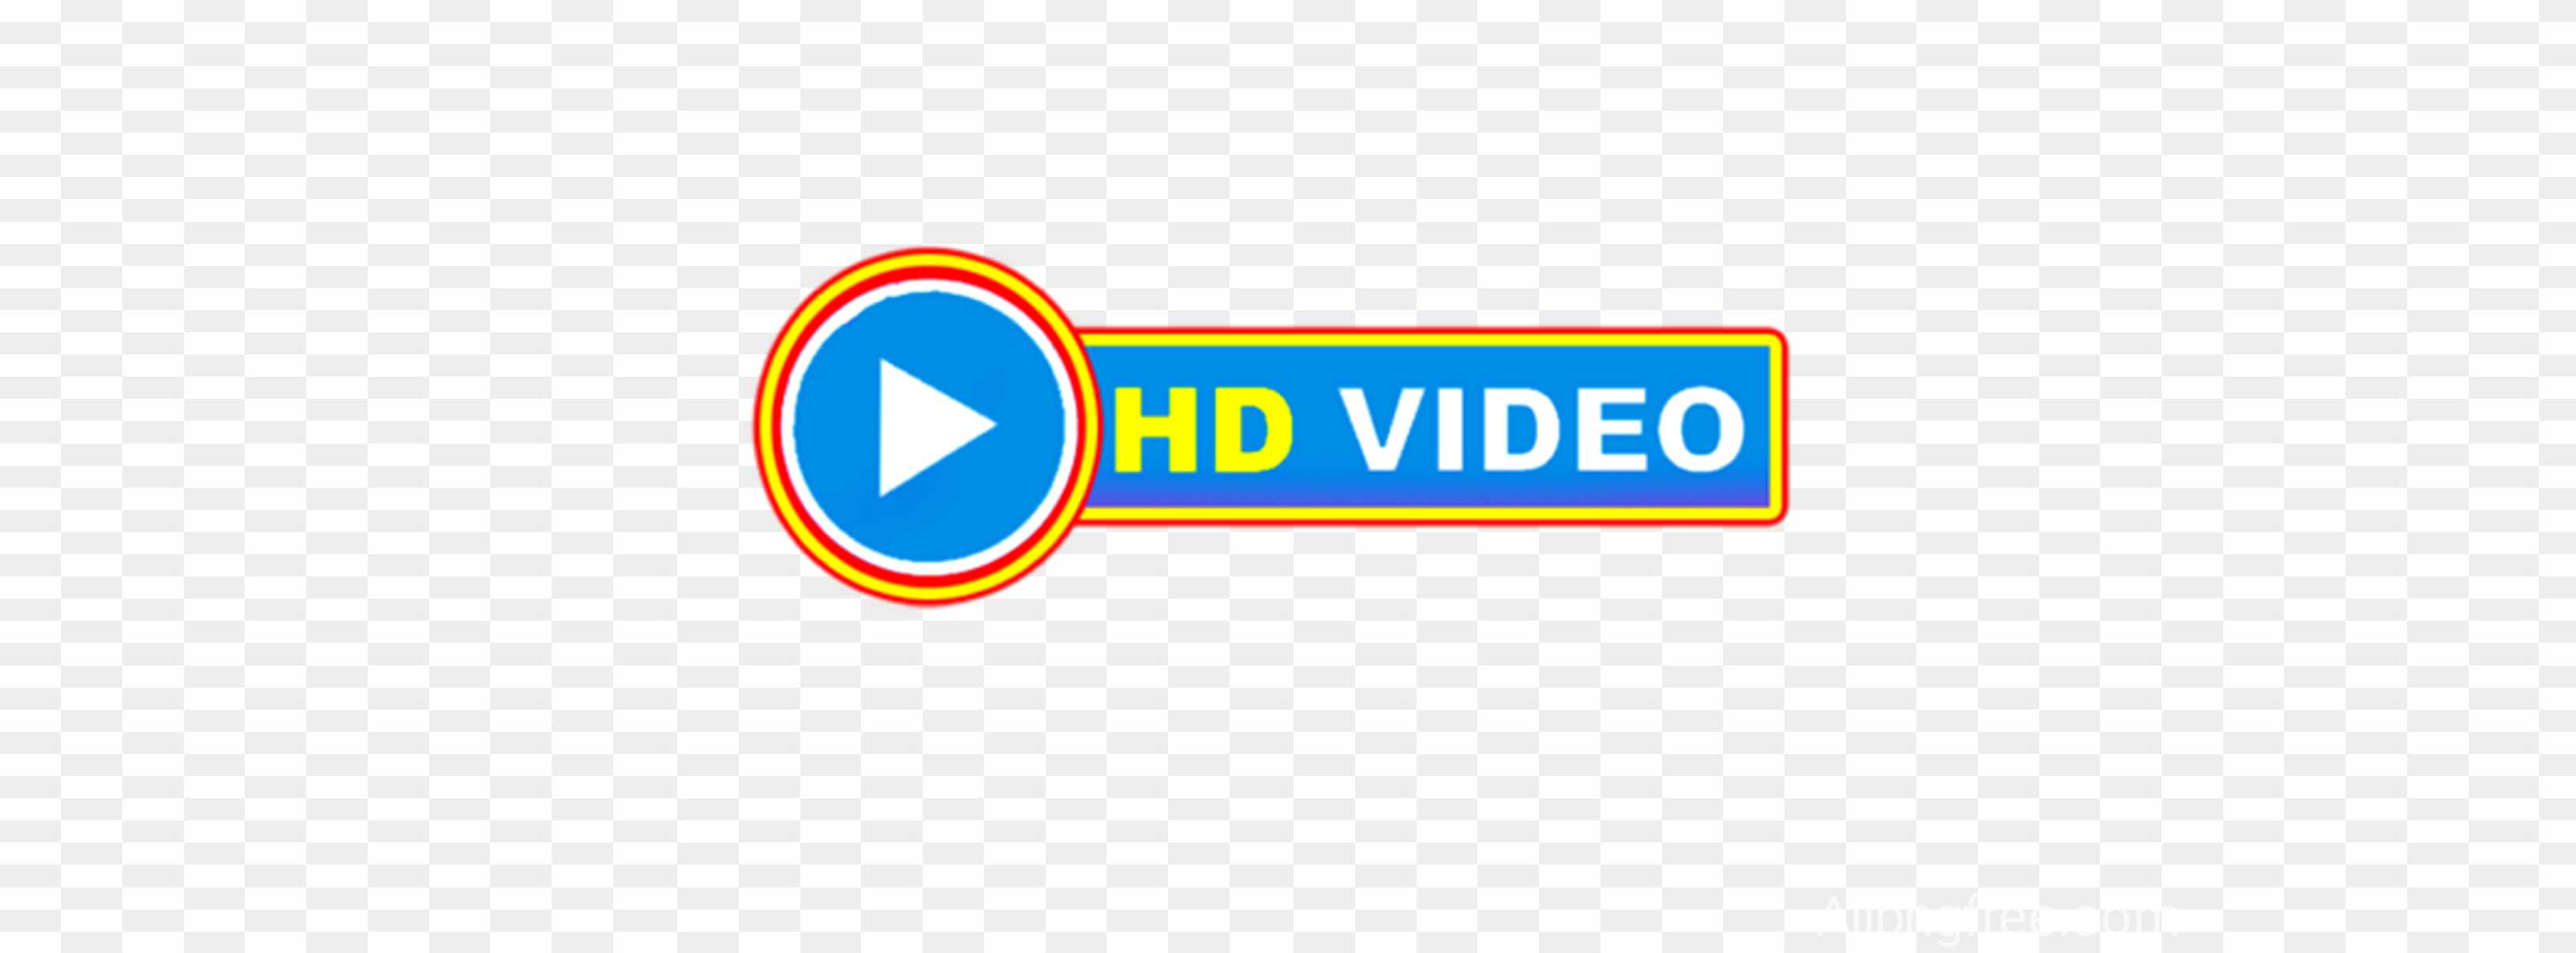 Video song logo PNG download